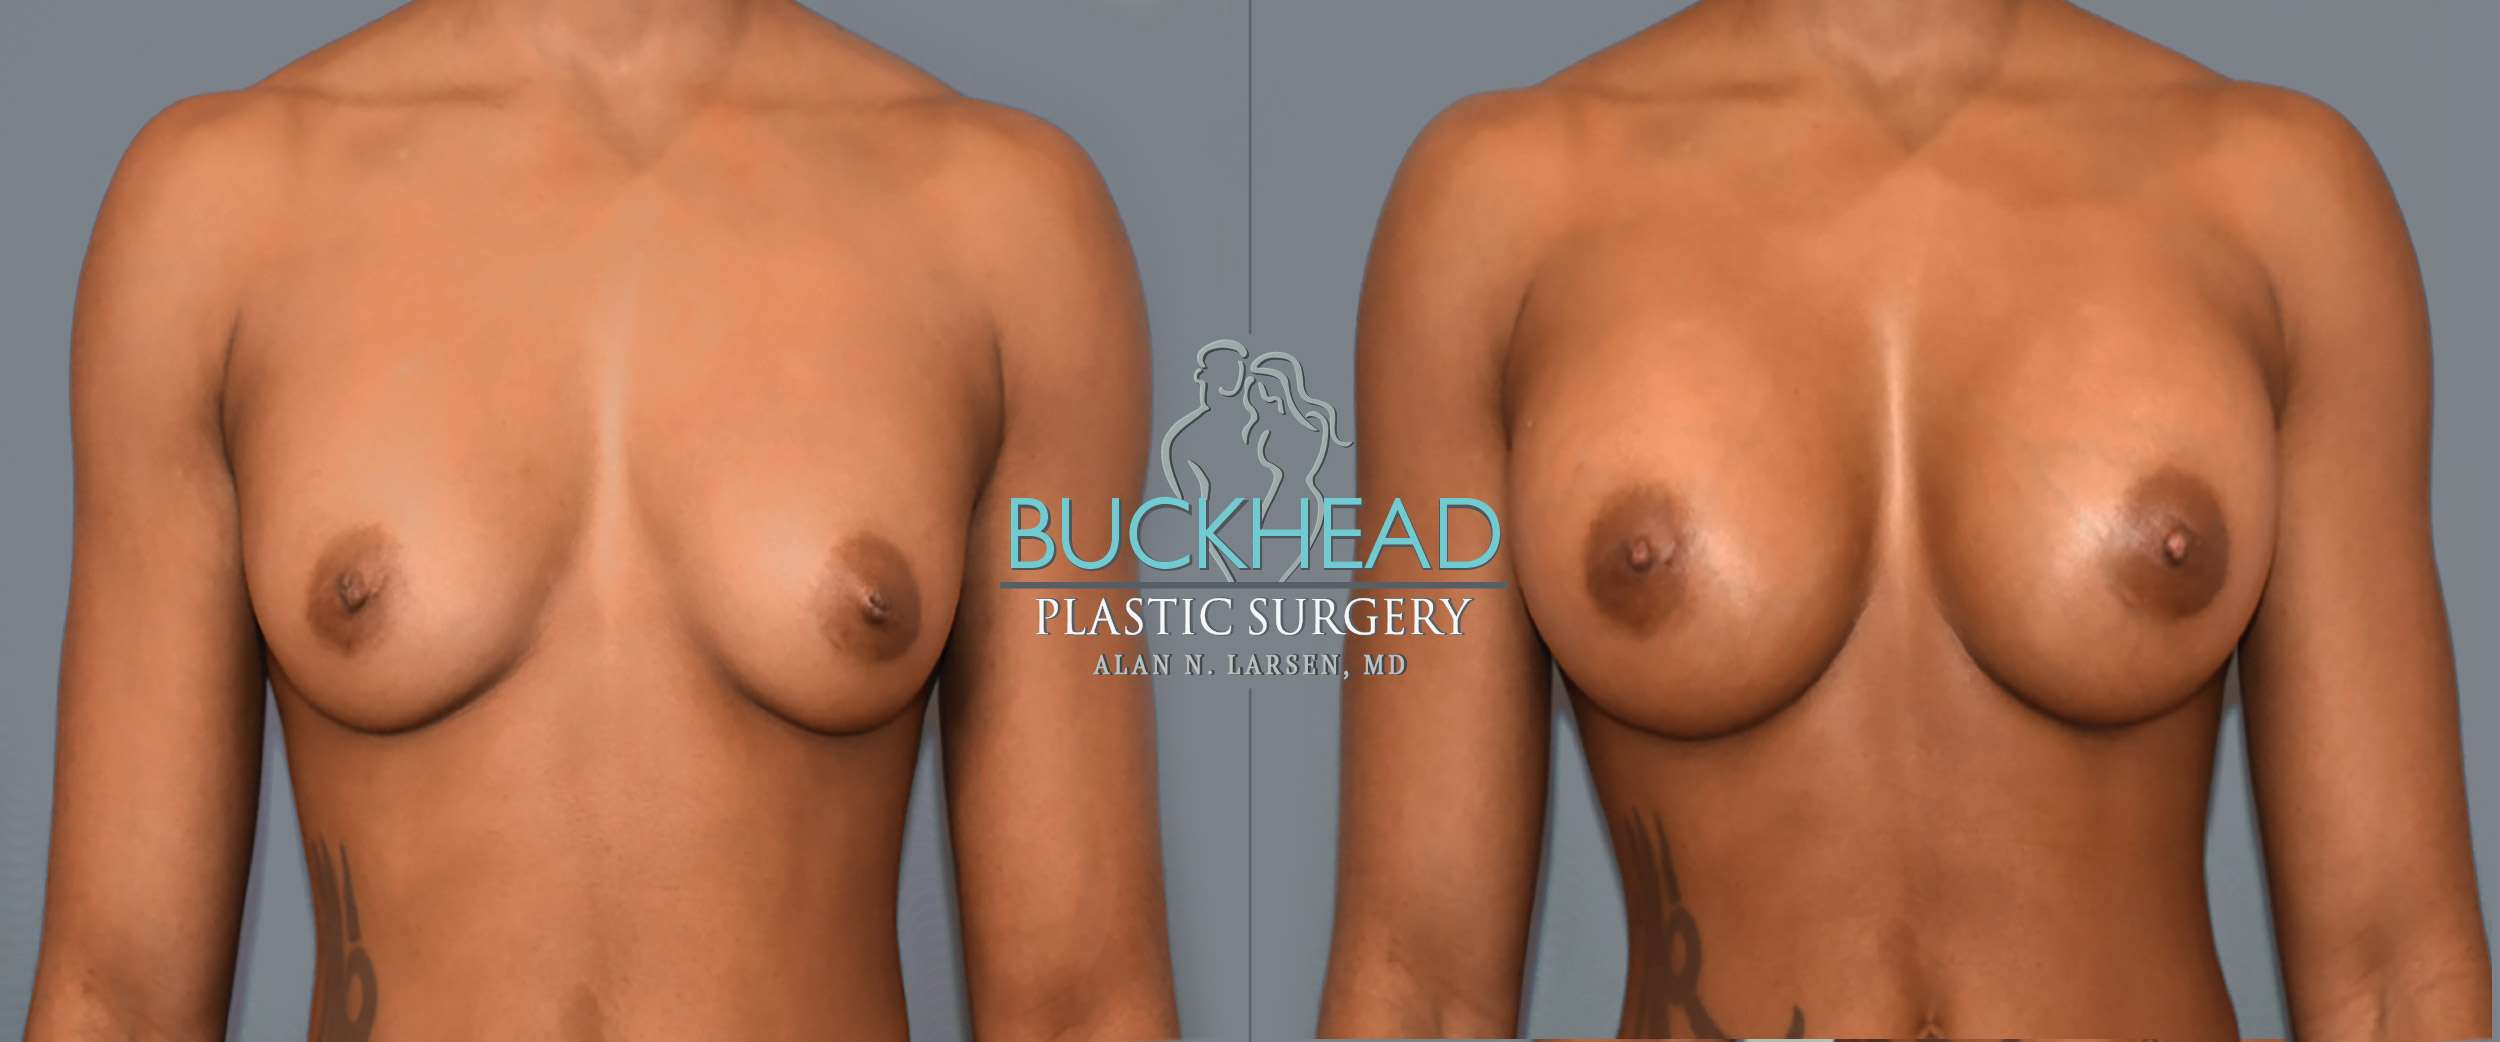 Before and After Photo Gallery | Breast Augmentation | Buckhead Plastic Surgery | Alan N. Larsen, MD | Double Board-Certified Plastic Surgeon in Atlanta GA